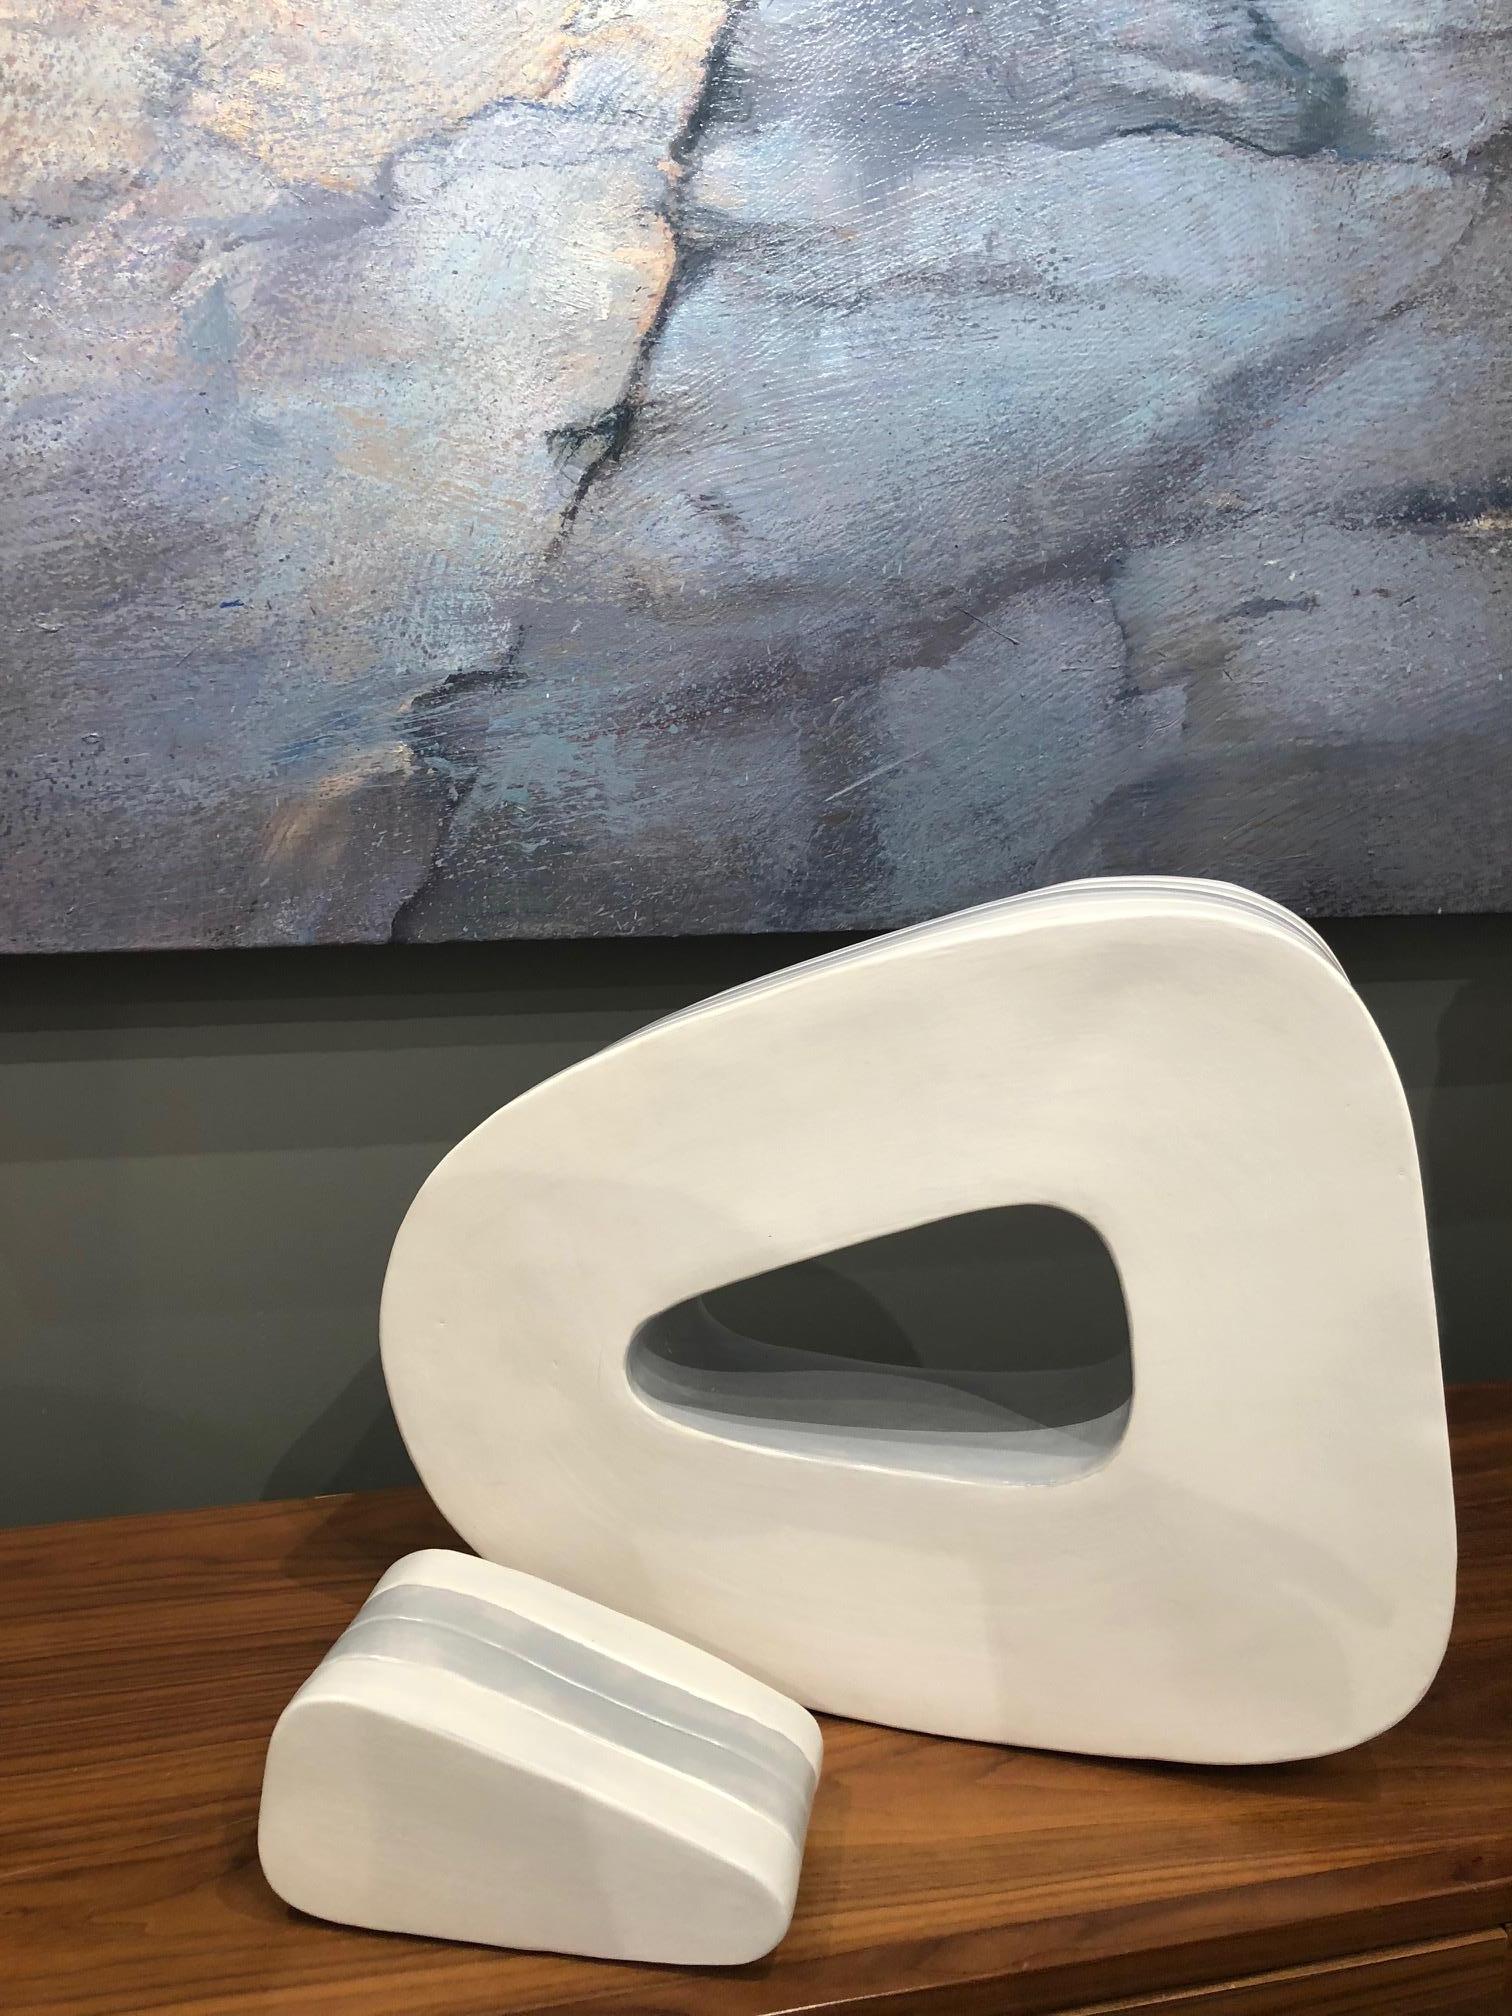 White and cool grey ceramic sculpture from Pop Art pioneer Jane B. Grimm, whose artistic career exploded onto the 1960's art and fashion scene in NYC when her free-form sculptural jewelry designs, spoke to a new generation. Grimm's jewelry designs,